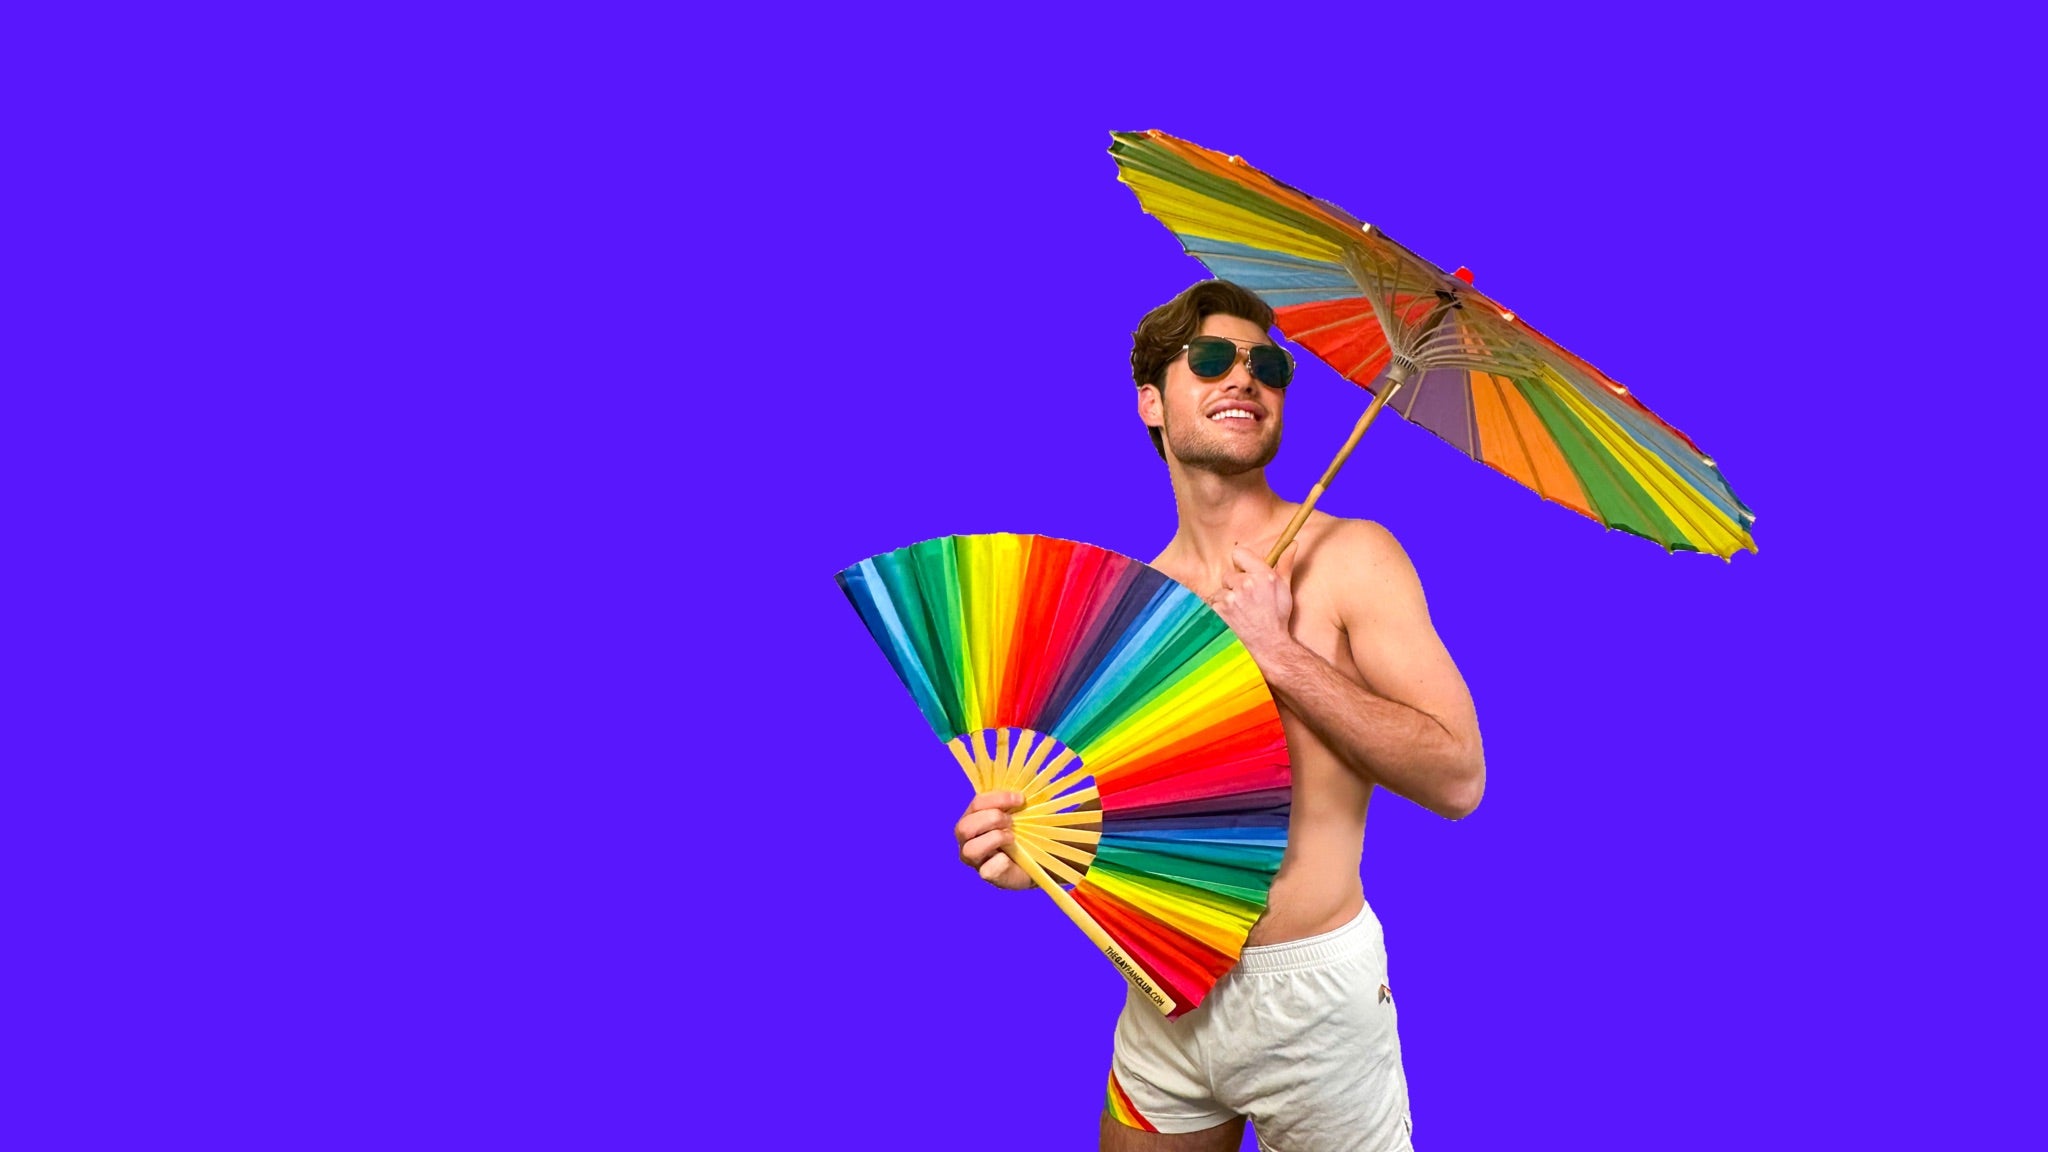 The Pride Hand Fan Shop - Shop the best rainbow fans for pride at The Gay Fan Club